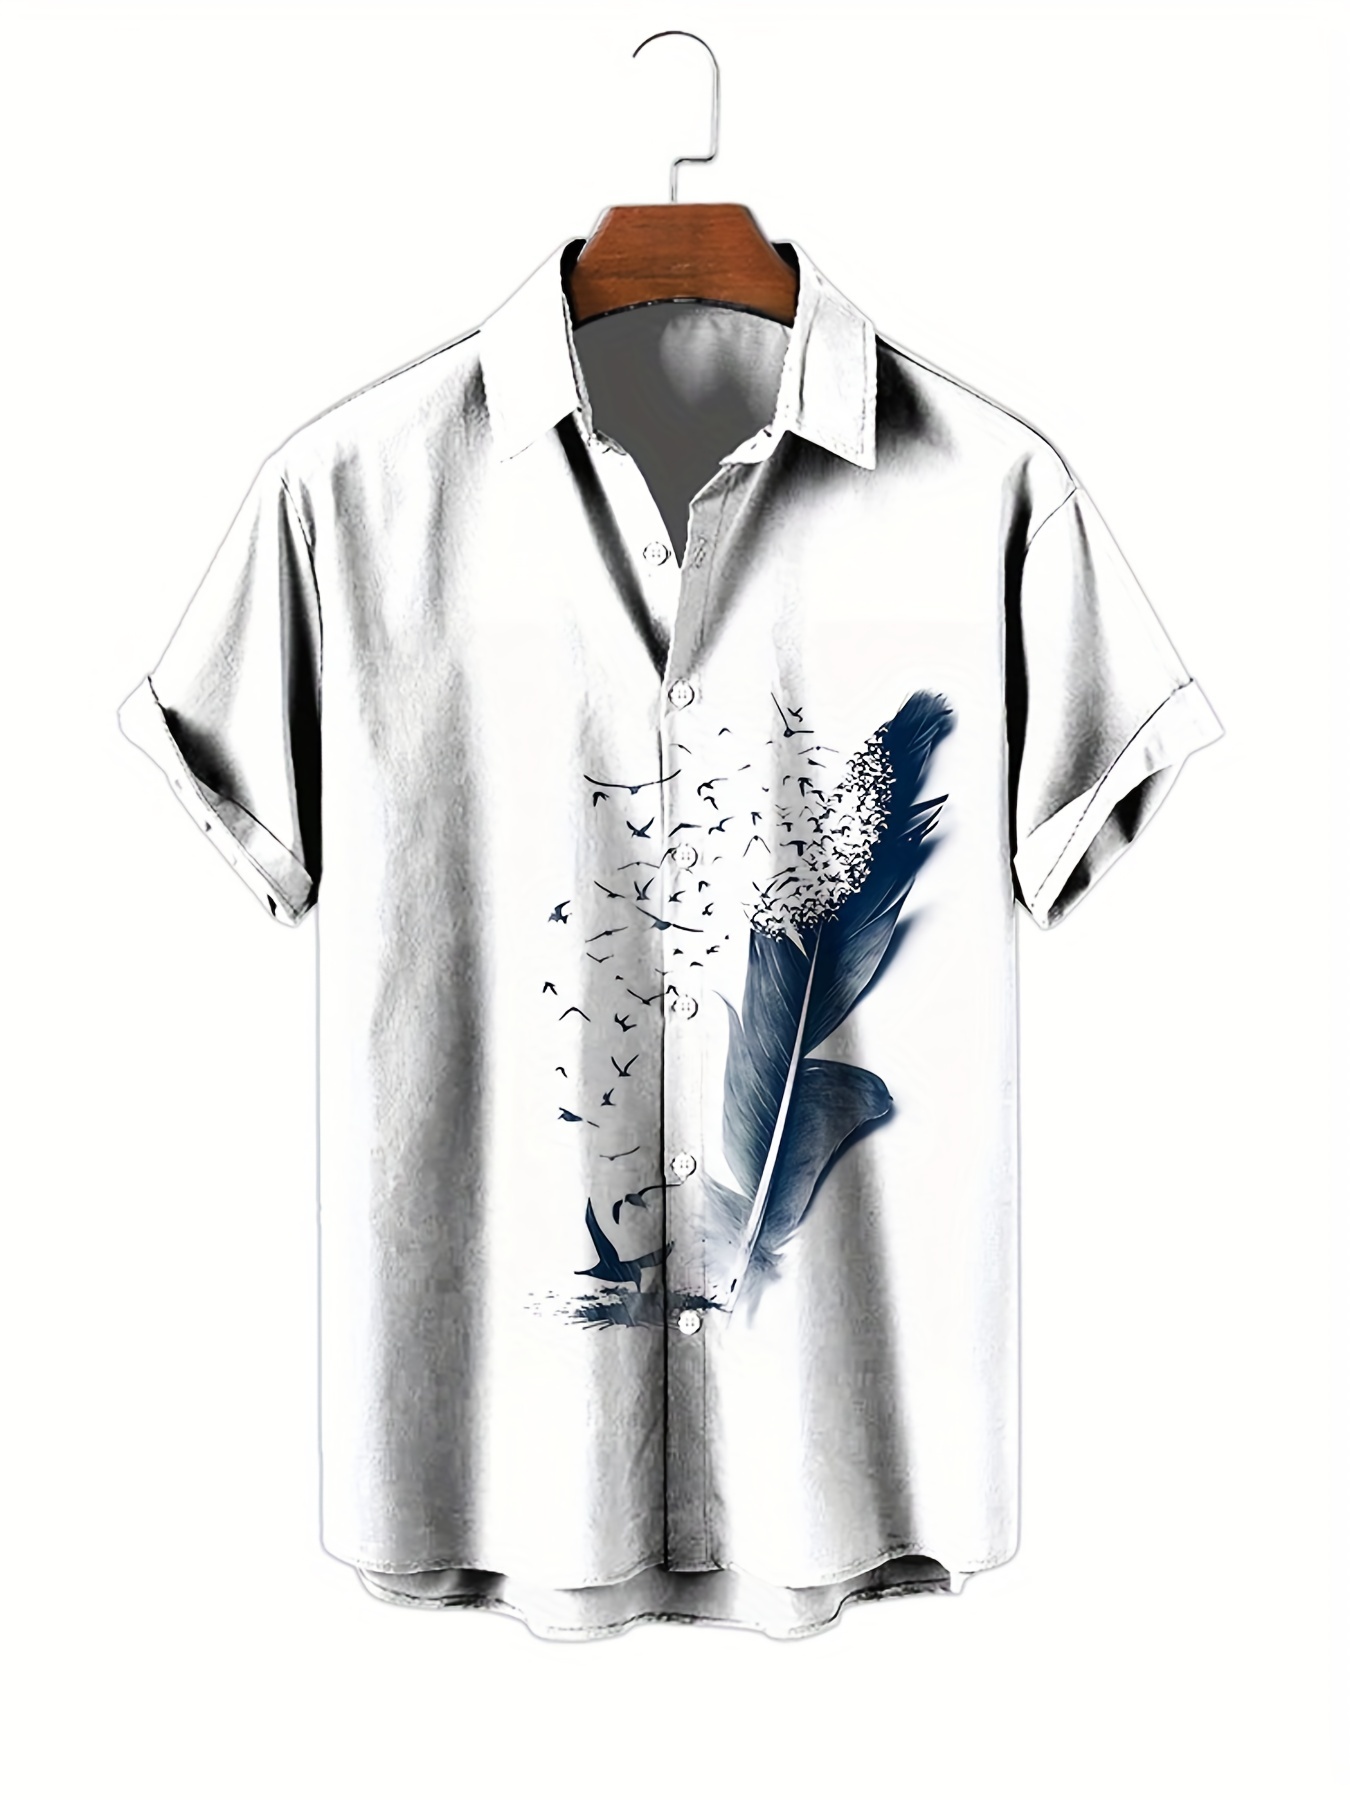 New fashion men's shirt feather pattern 3D printing casual and